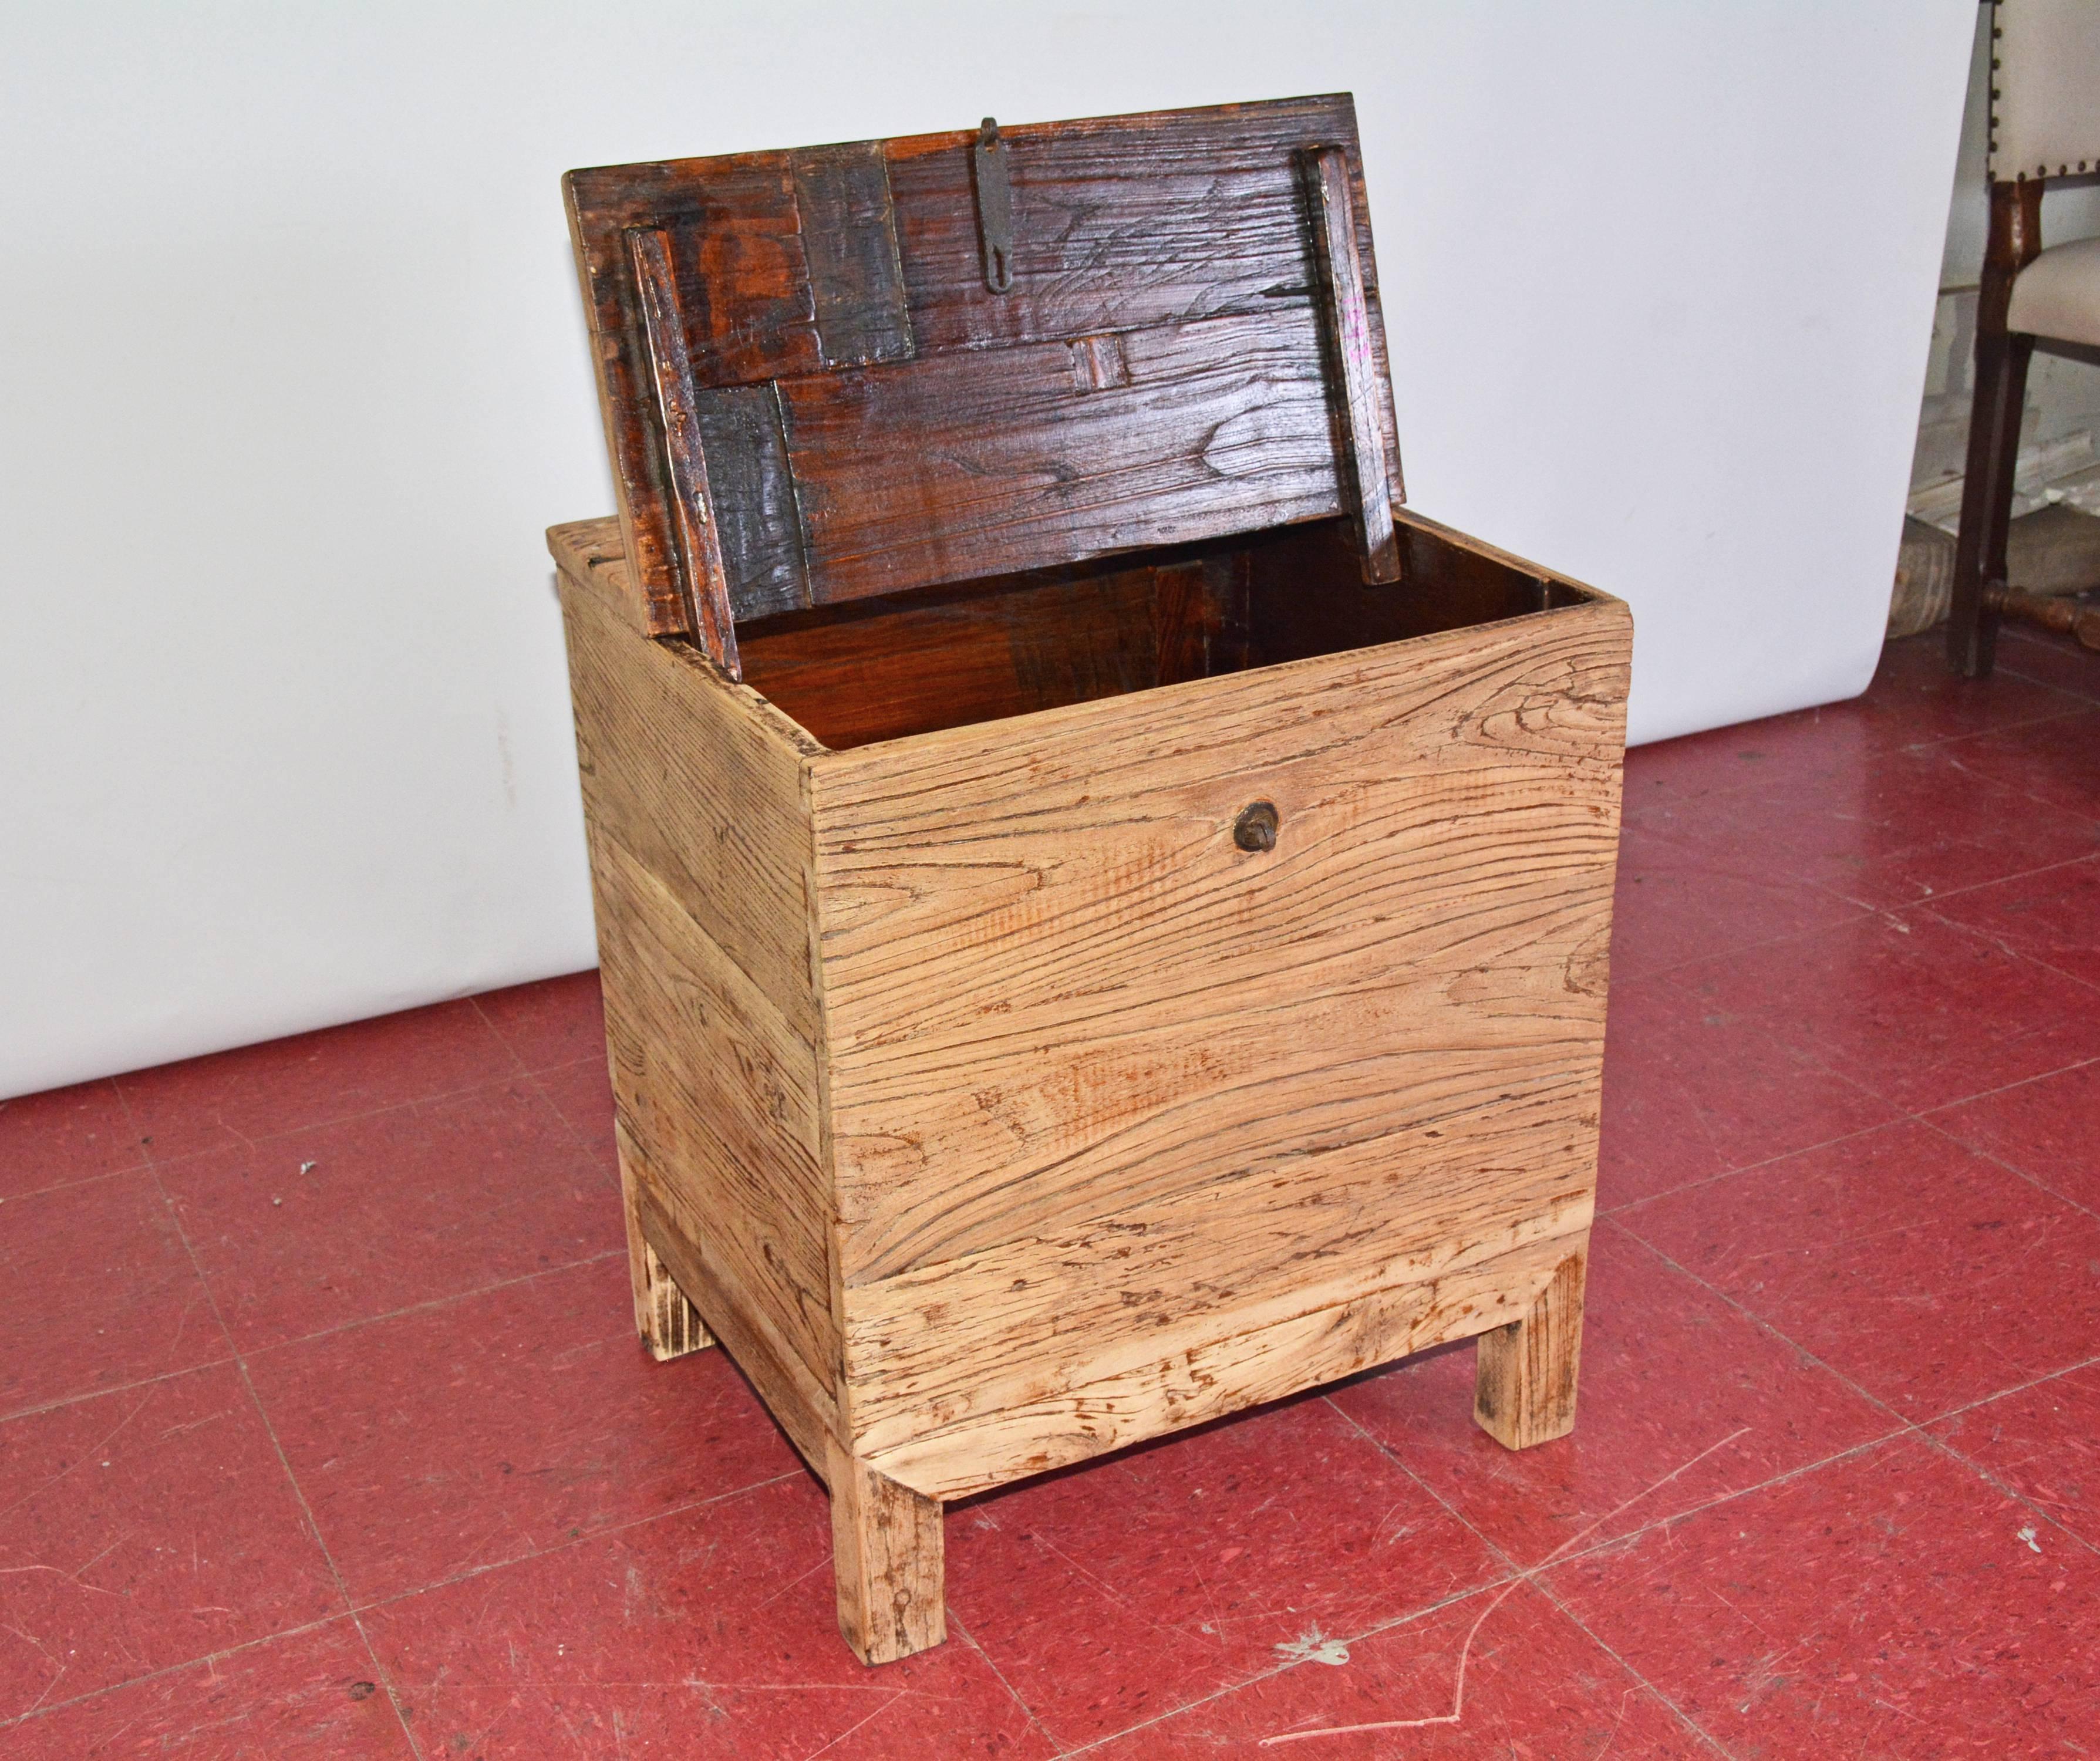 Hand-Crafted Rustic Elmwood Storage Box or End Table